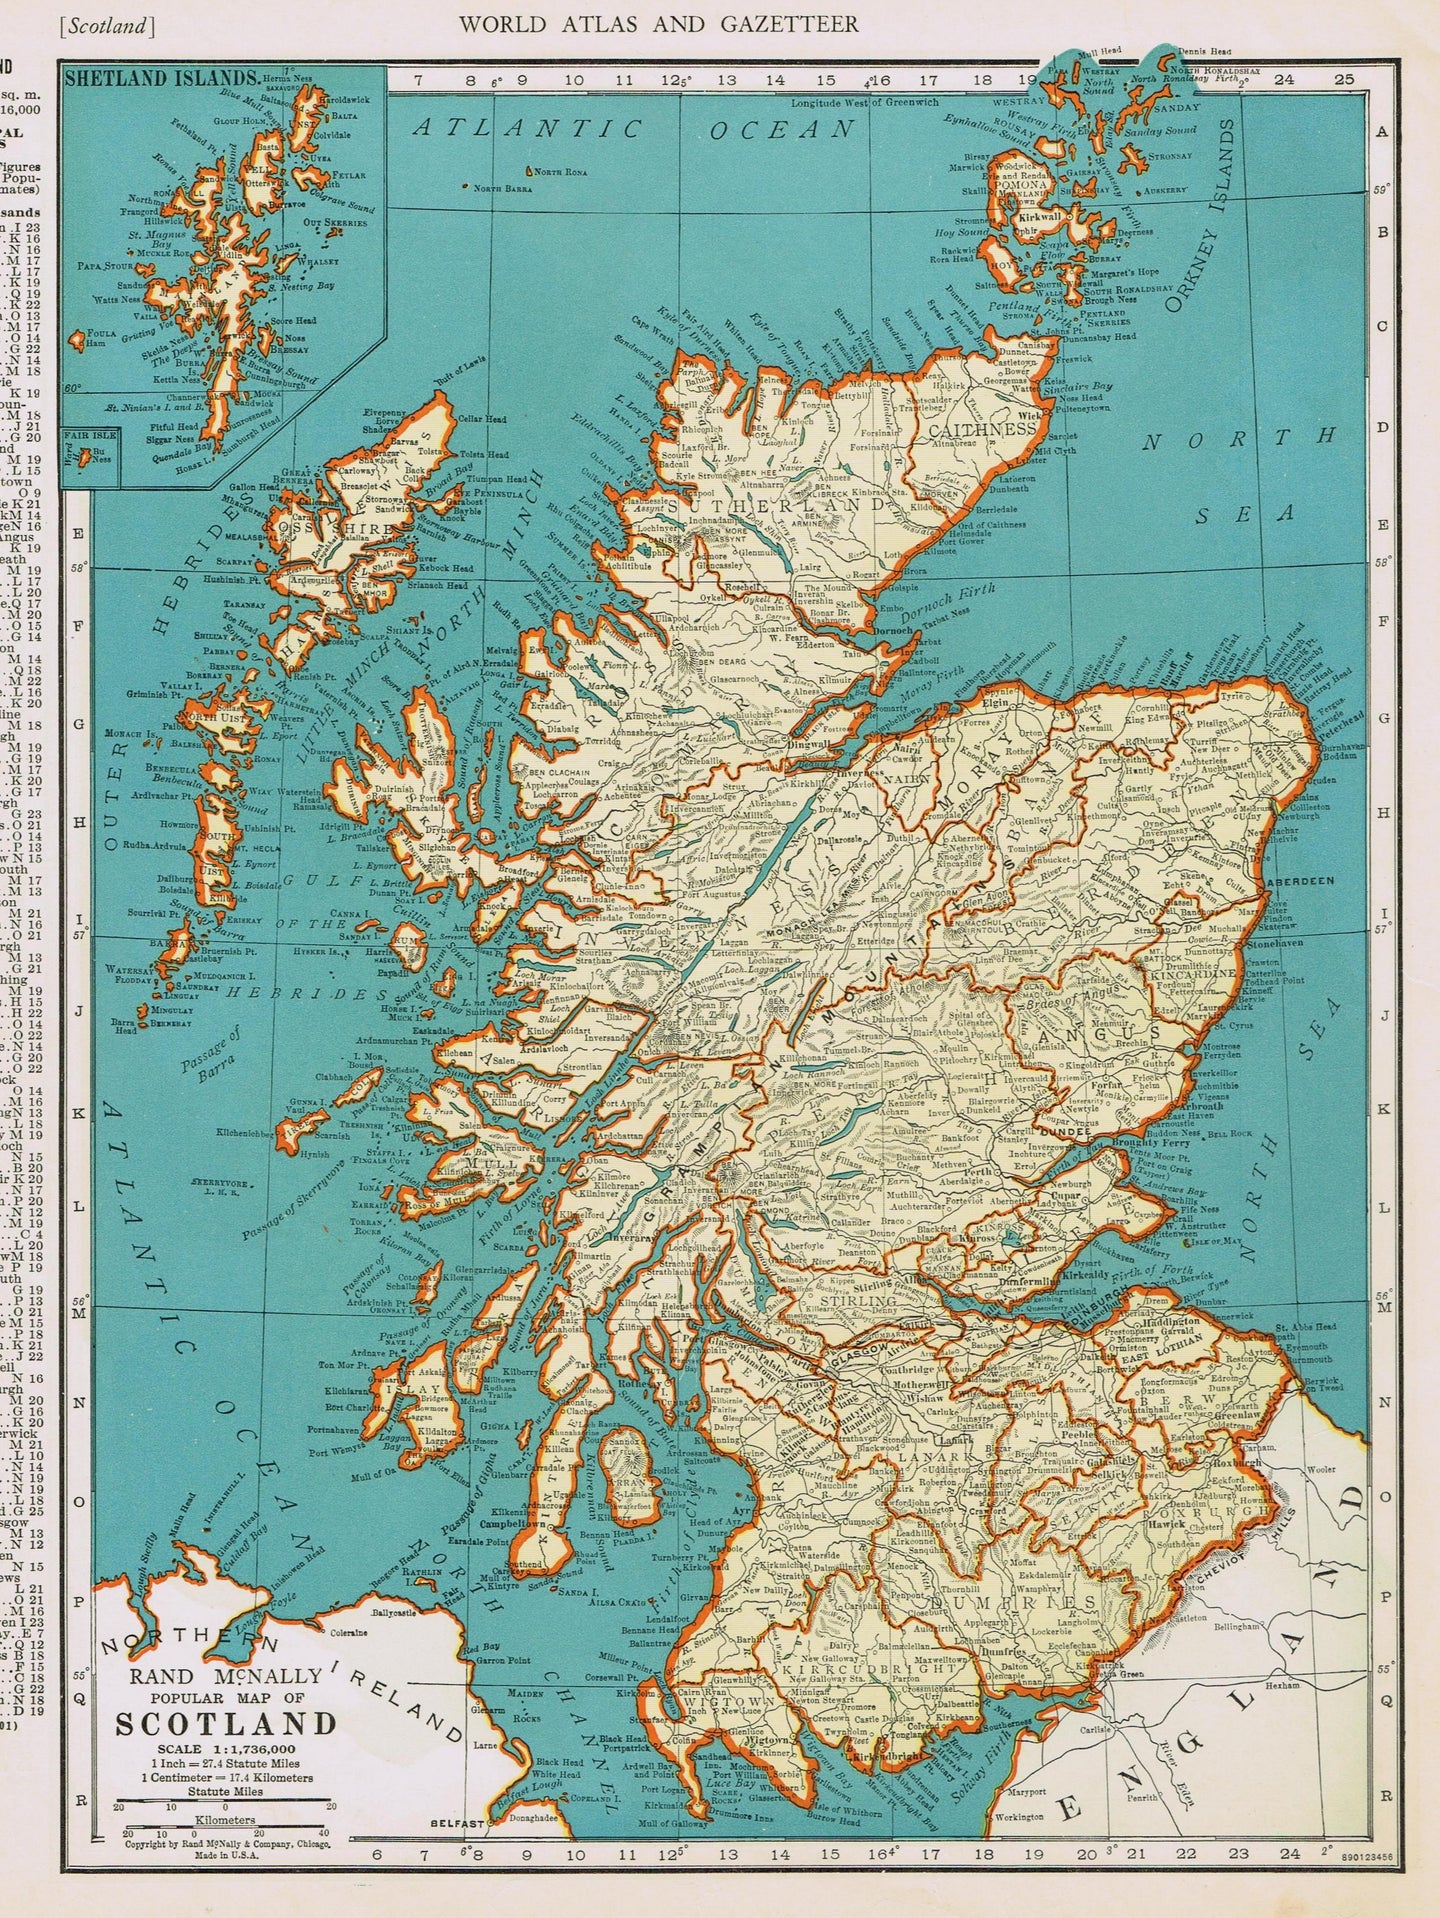 Genuine-Antique-Map-Popular-Map-of-Scotland-1940-Rand-McNally-Maps-Of-Antiquity